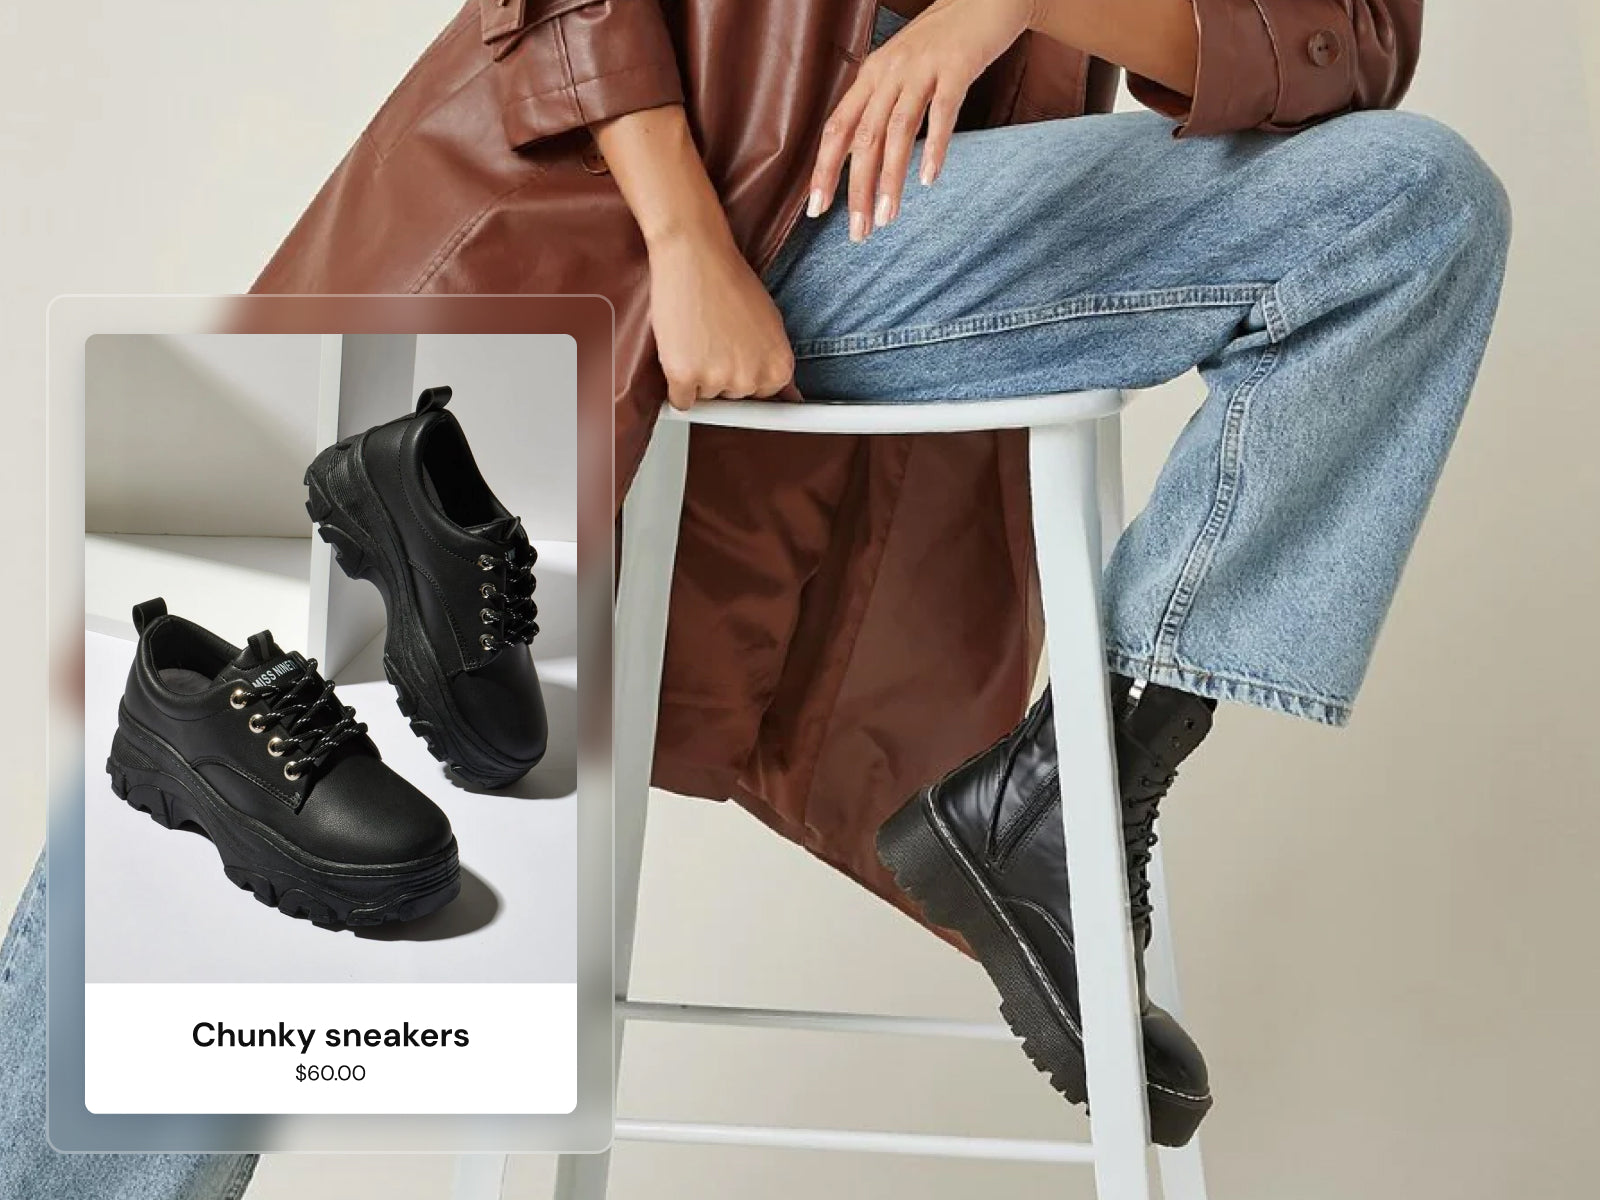 Screenshot of Flex Shopify theme by Out of the Sandbox. Background image of woman weather brown leather jacket, blue jeans, and black boots sitting on a white stool. In front, screenshot of black chunky sneakers.